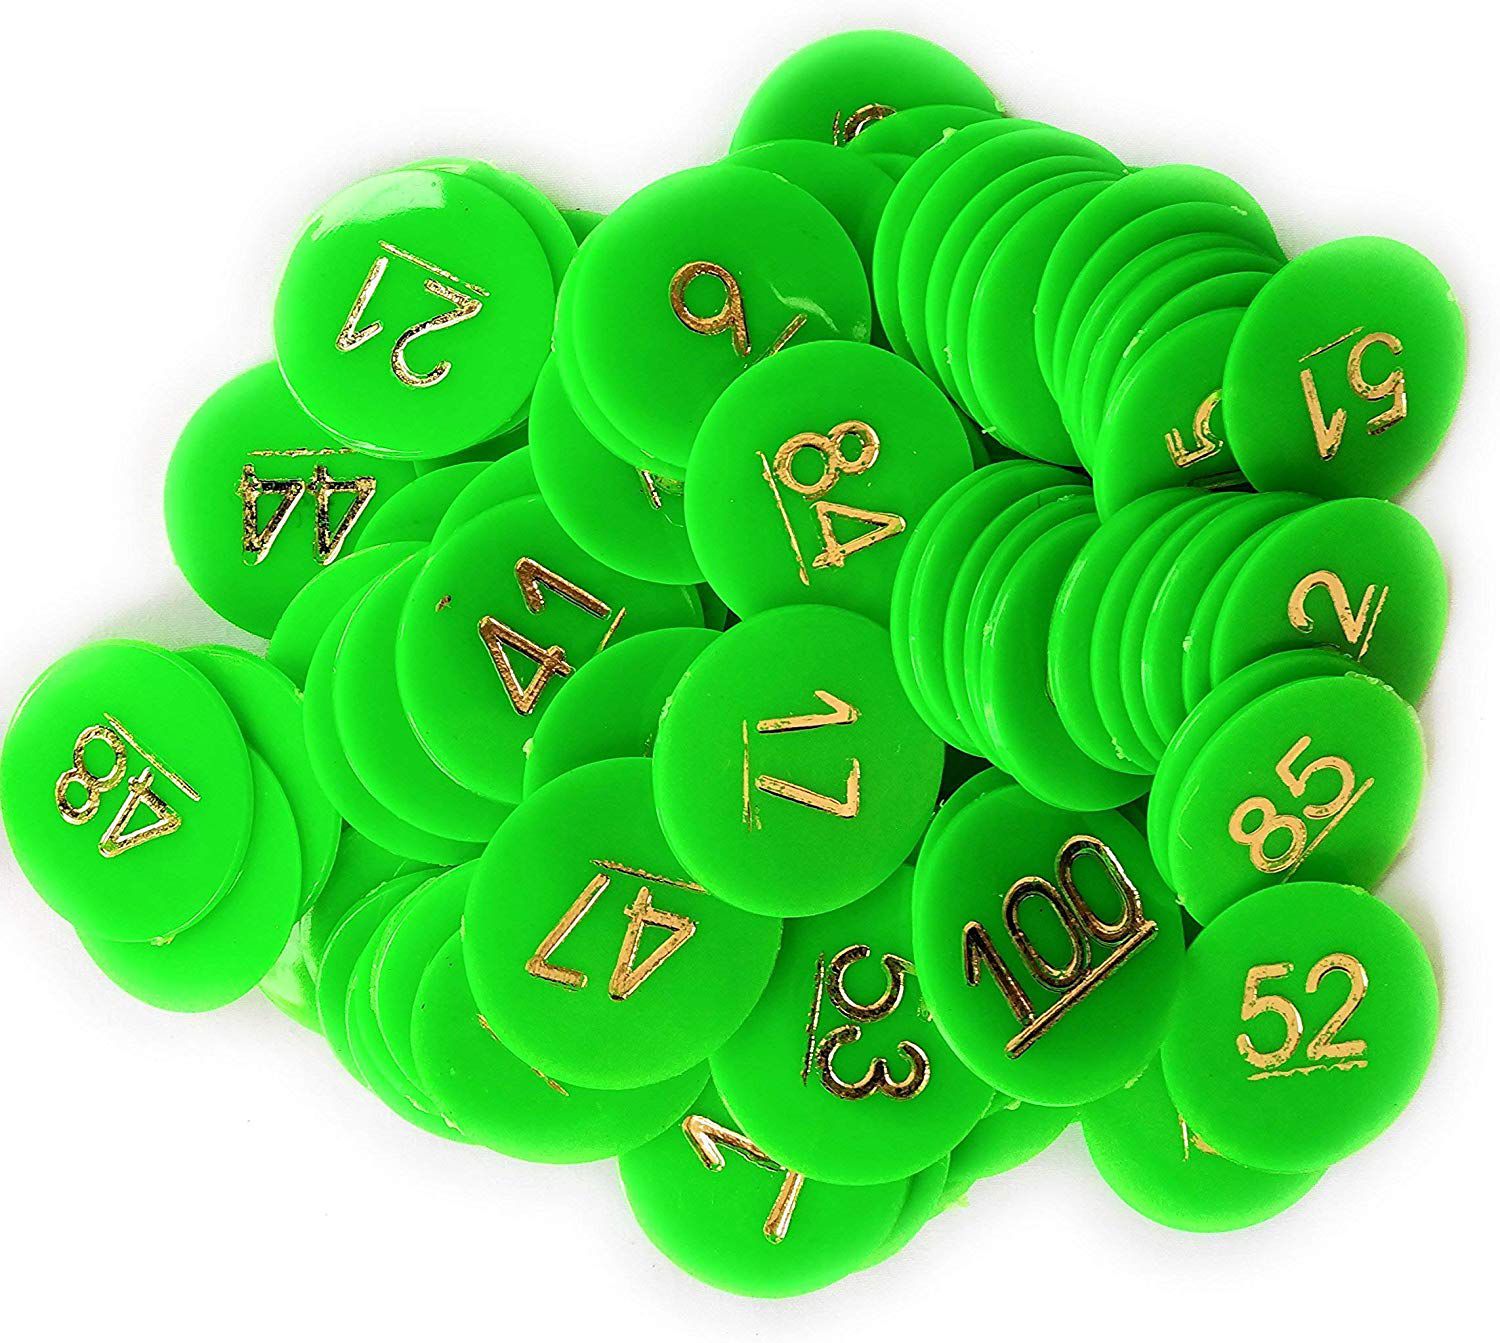 Used in Multiple Kind of Work and Games SIPL Plastic Coin/Token Numbered Plastic Token